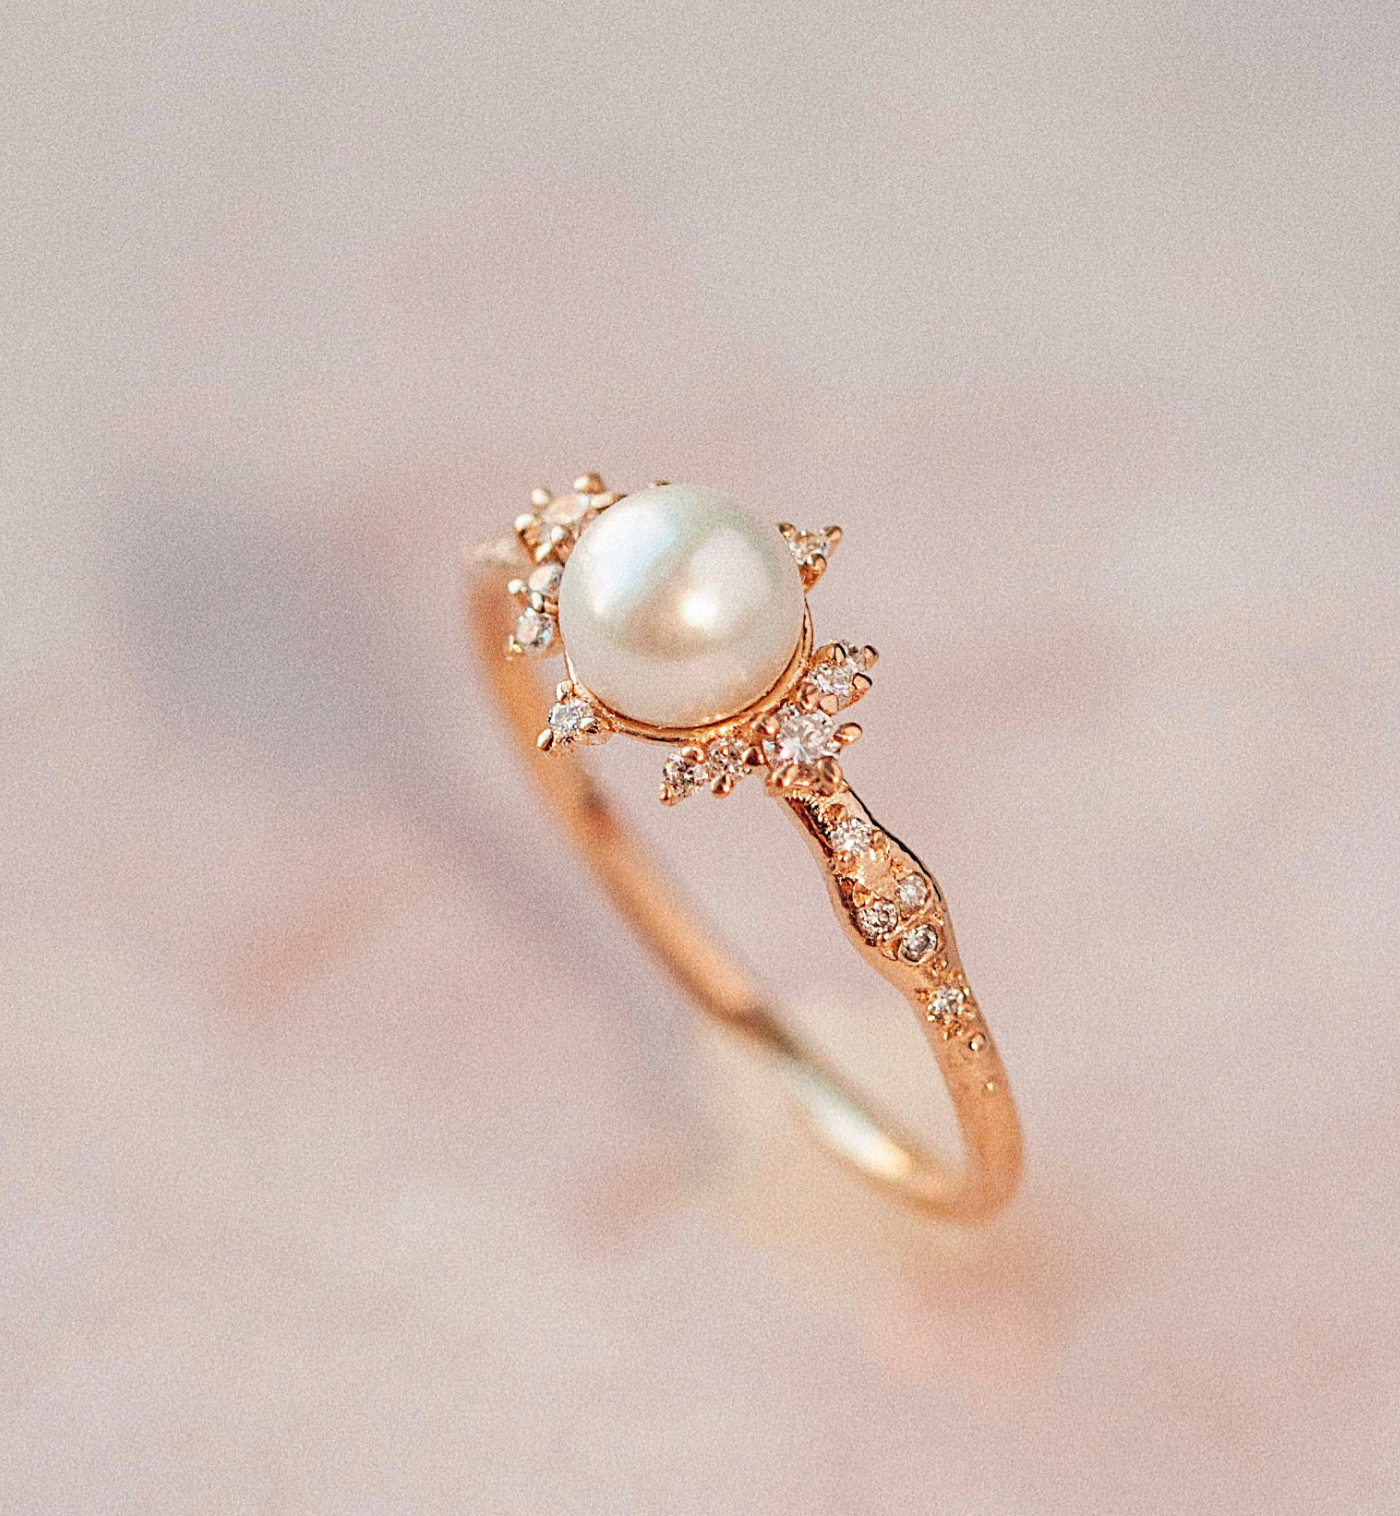 Load image into Gallery viewer, Side view of pearl and diamond ring on light pink background.
